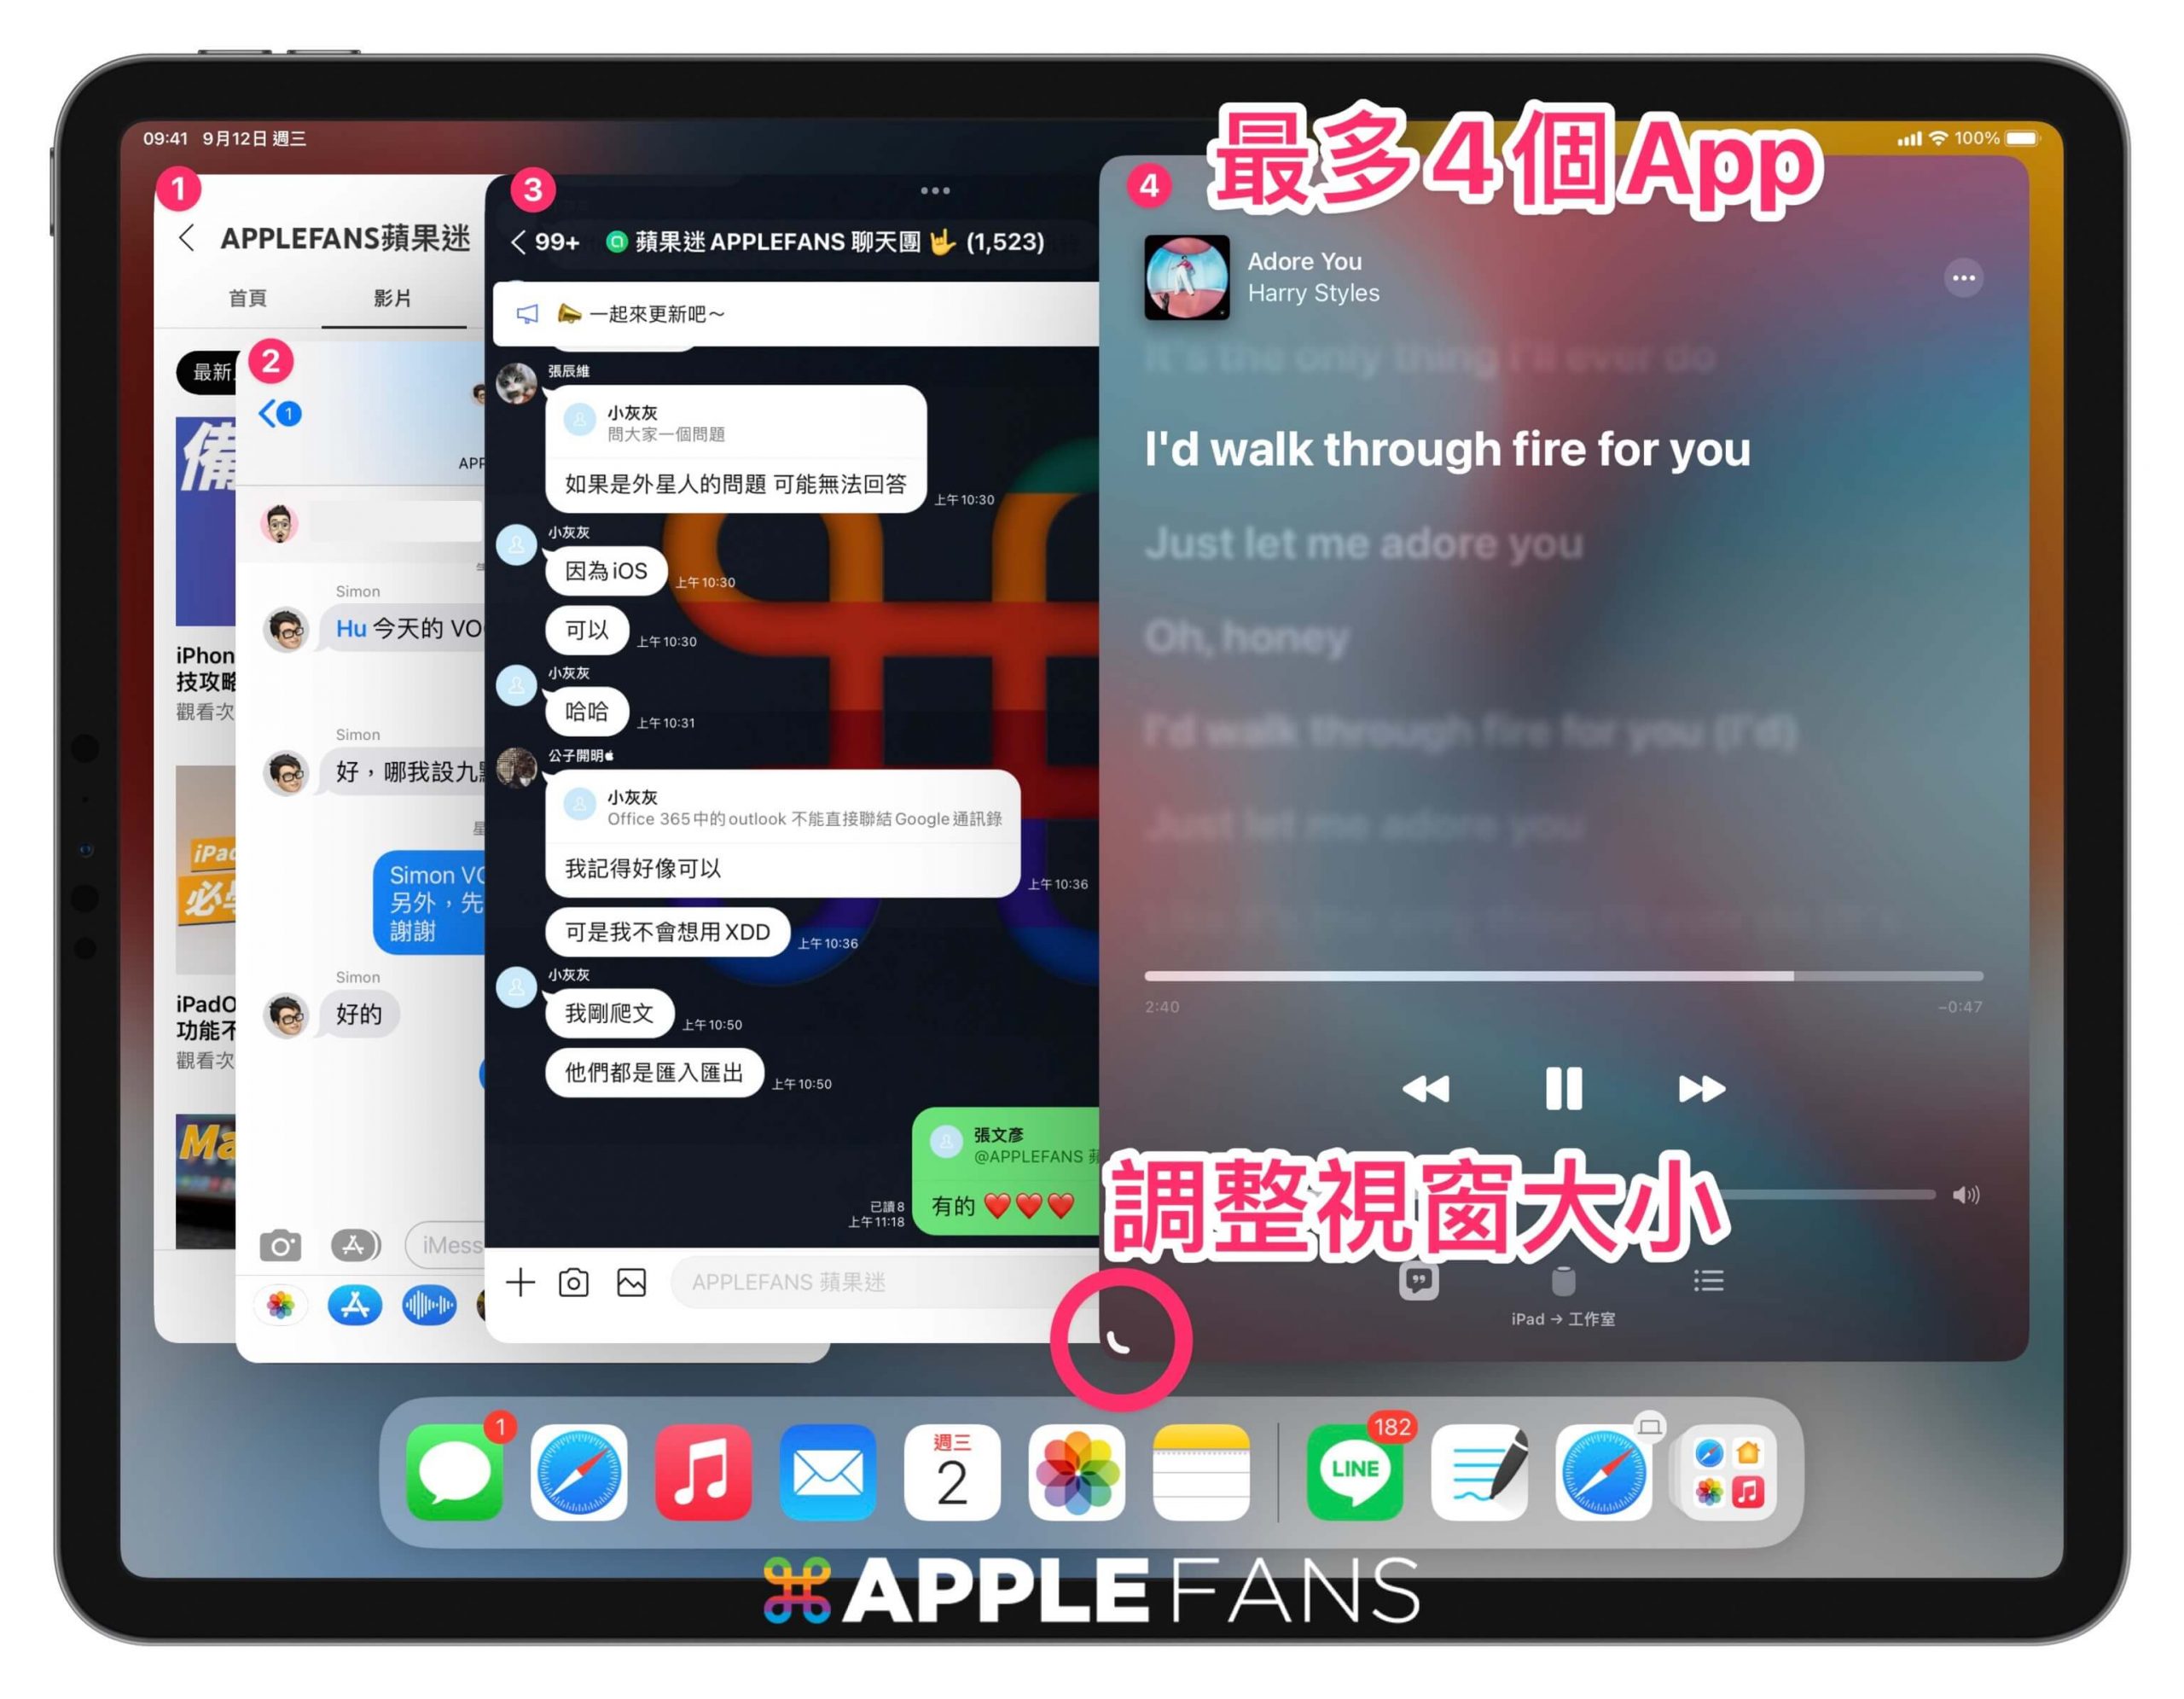 iPadOS 幕前調度 Stage Manager